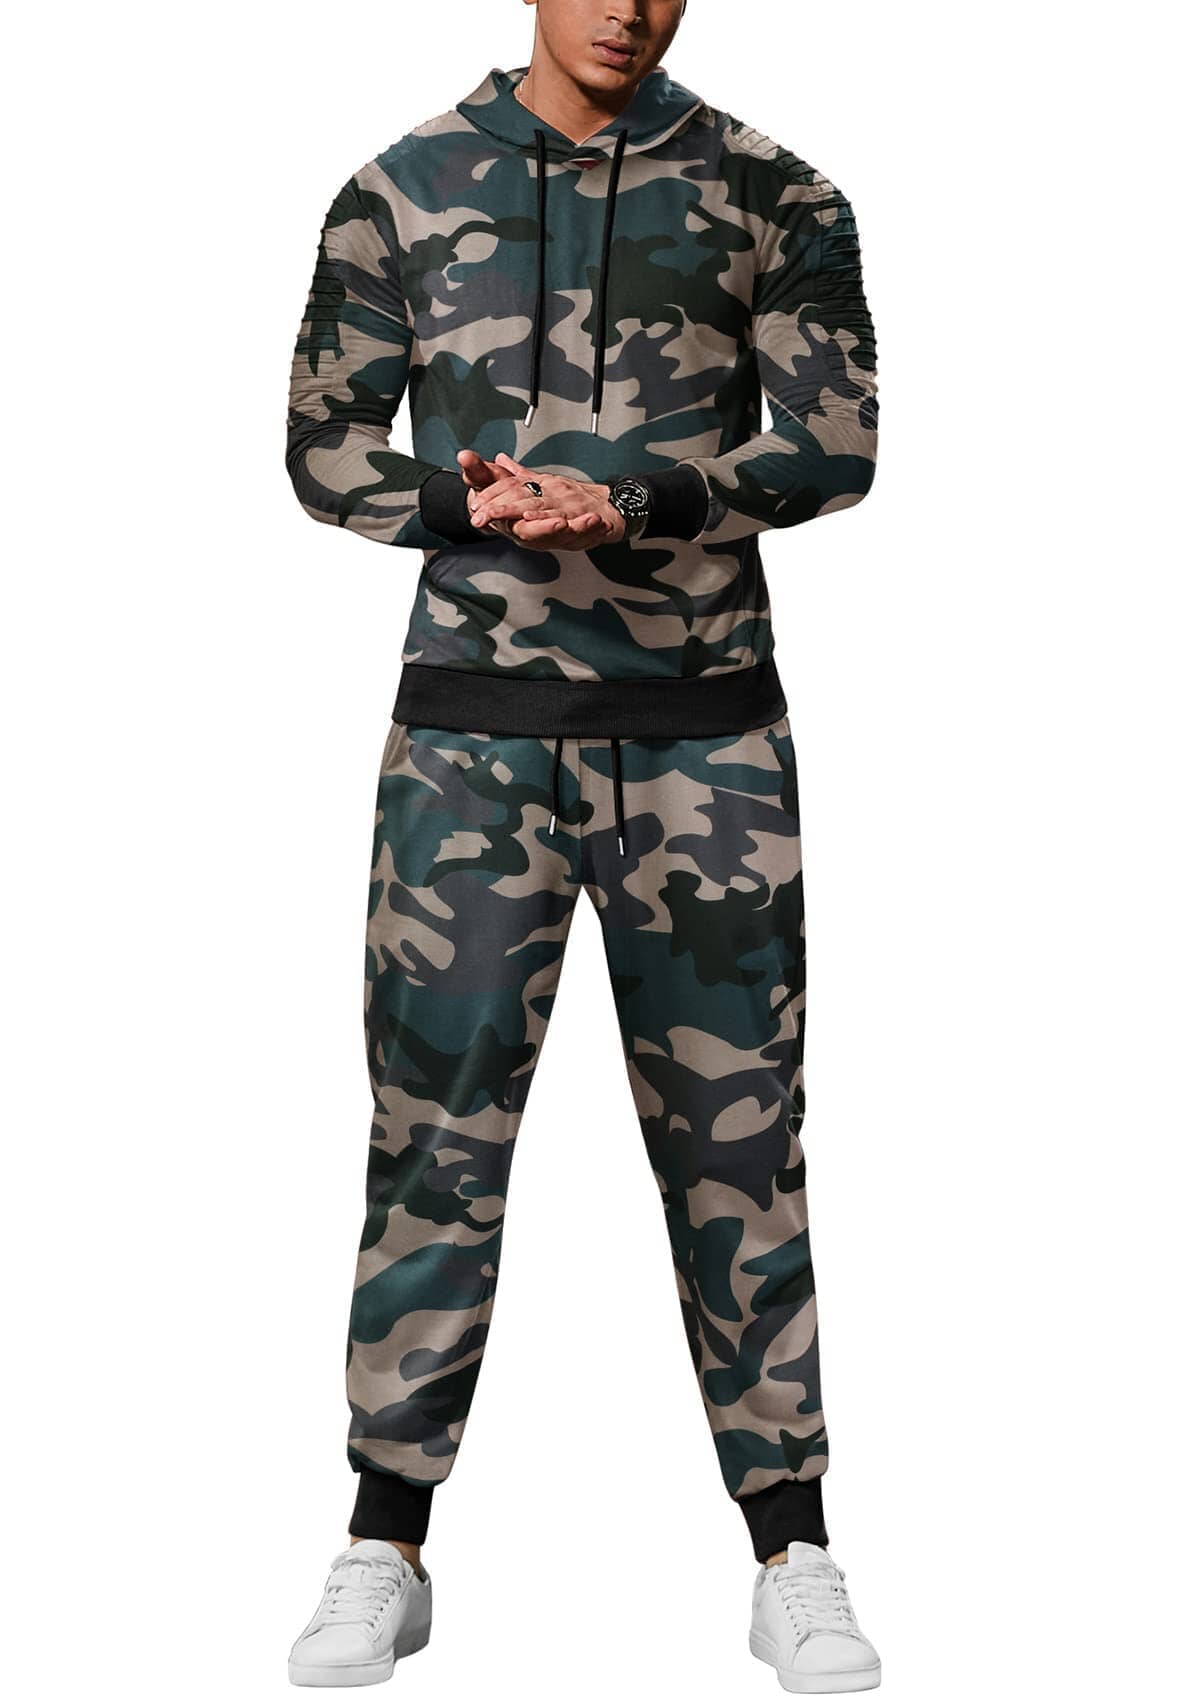 2 Piece Hoodie Jogging Athletic Suits (US Only) Sports Set Coofandy's Green Camo S 